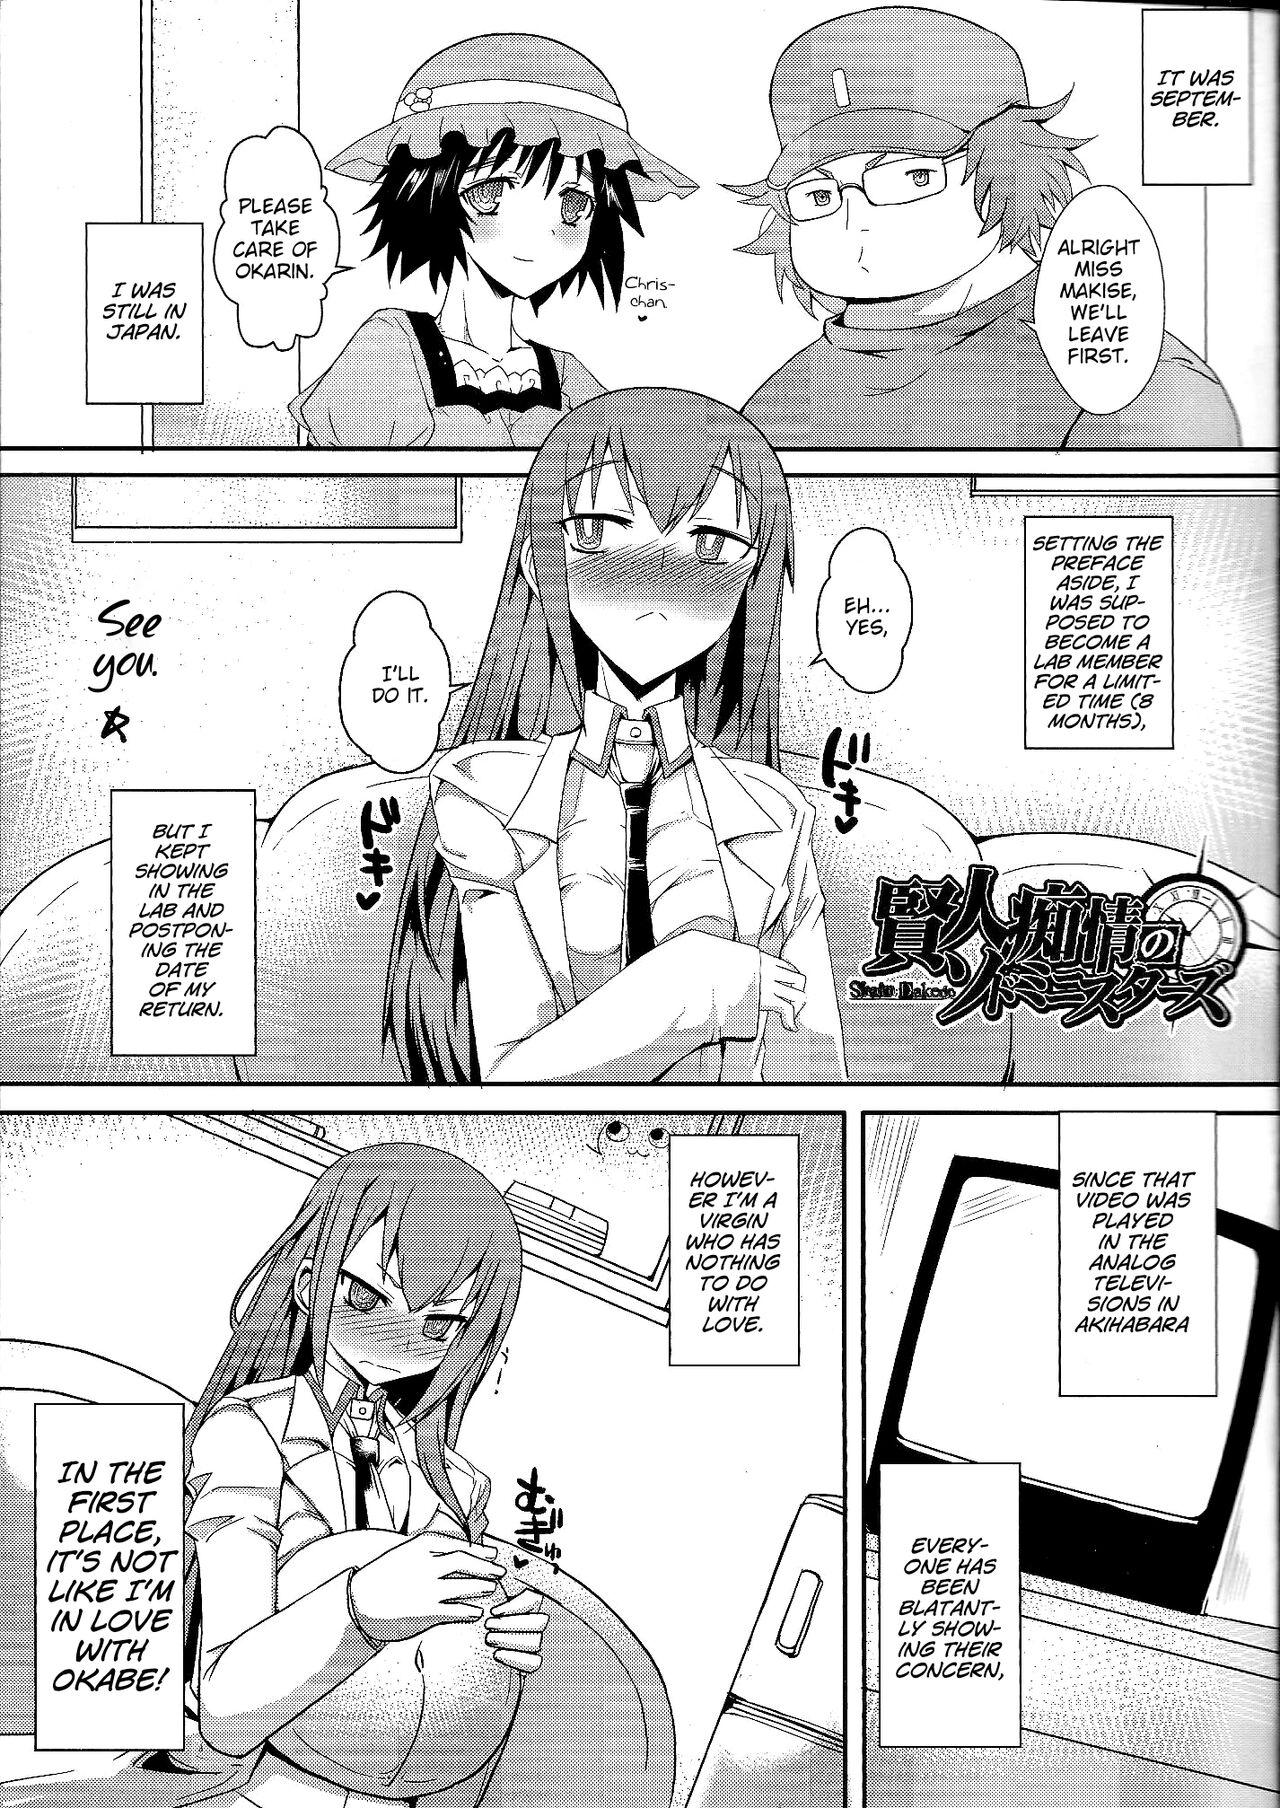 Cuckolding Kenjin Chijou no Sodoministers - Steinsgate Job - Page 4